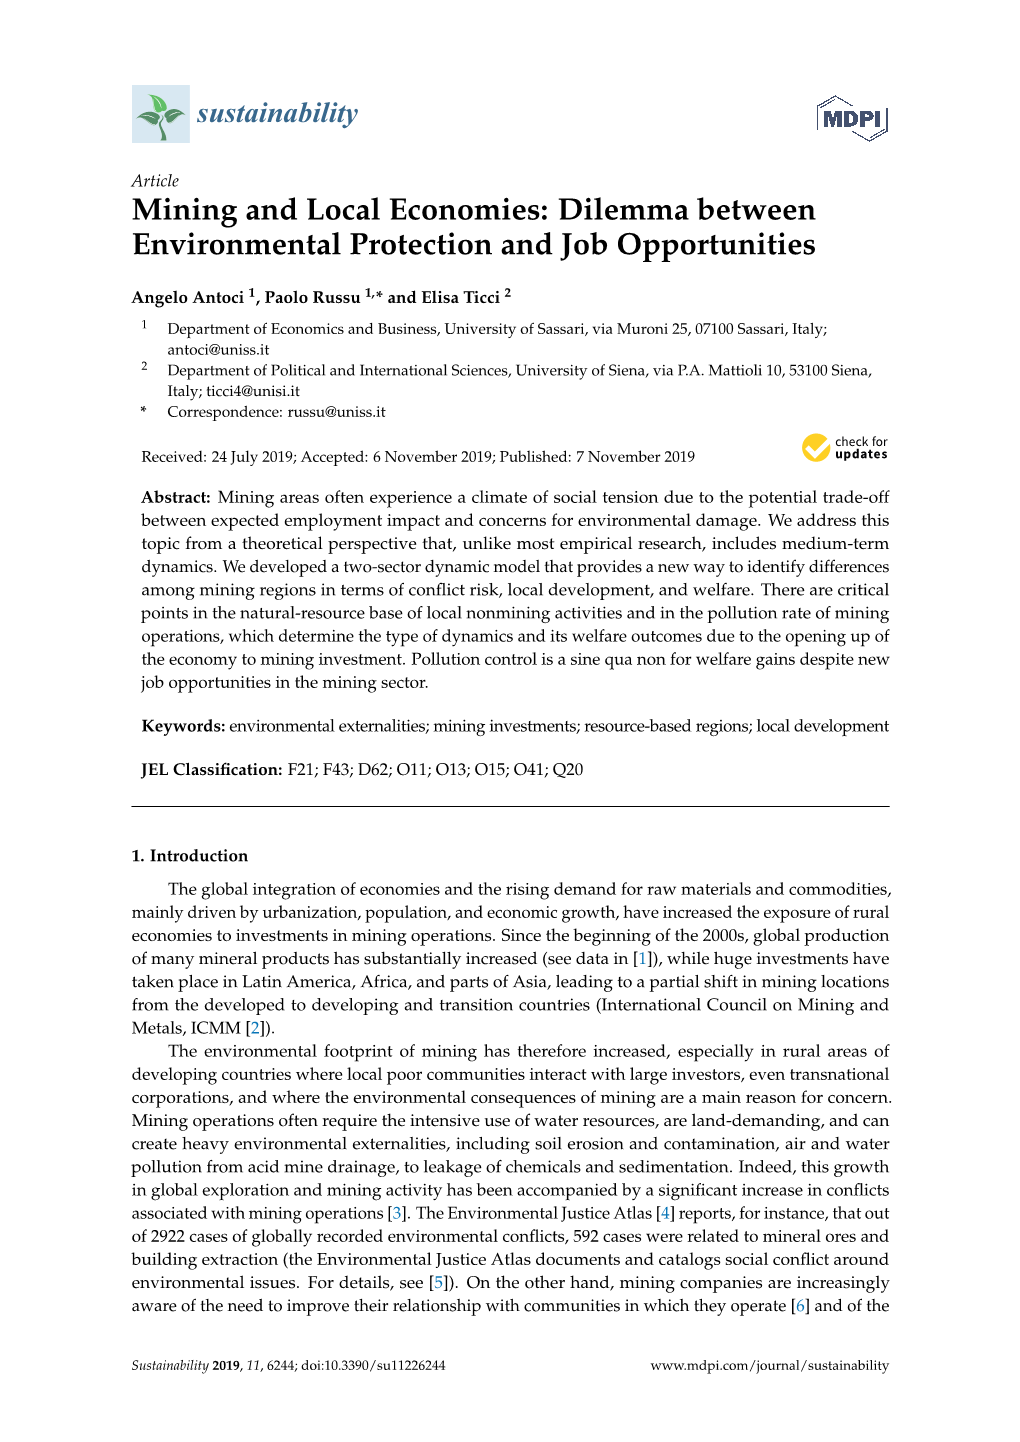 Mining and Local Economies: Dilemma Between Environmental Protection and Job Opportunities